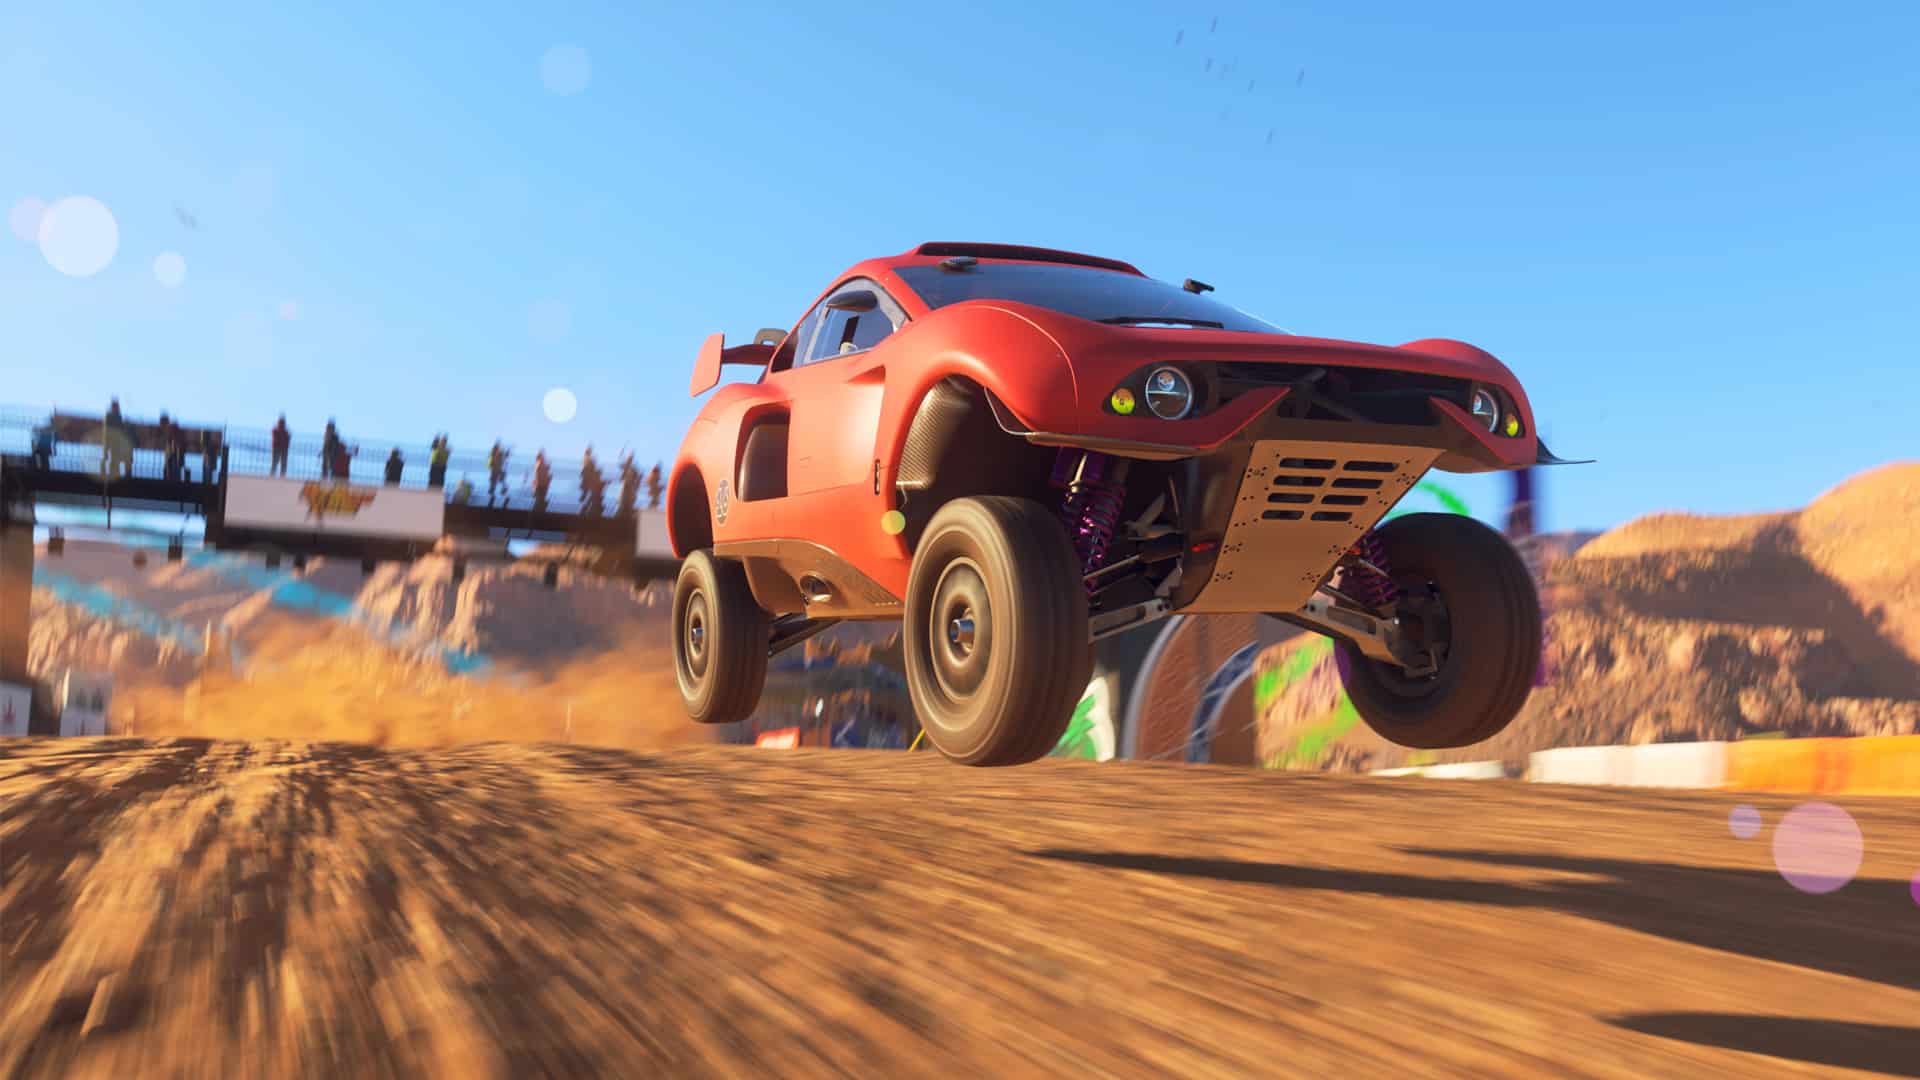 The PS5 now features variable refresh rate, includes DIRT 5 support